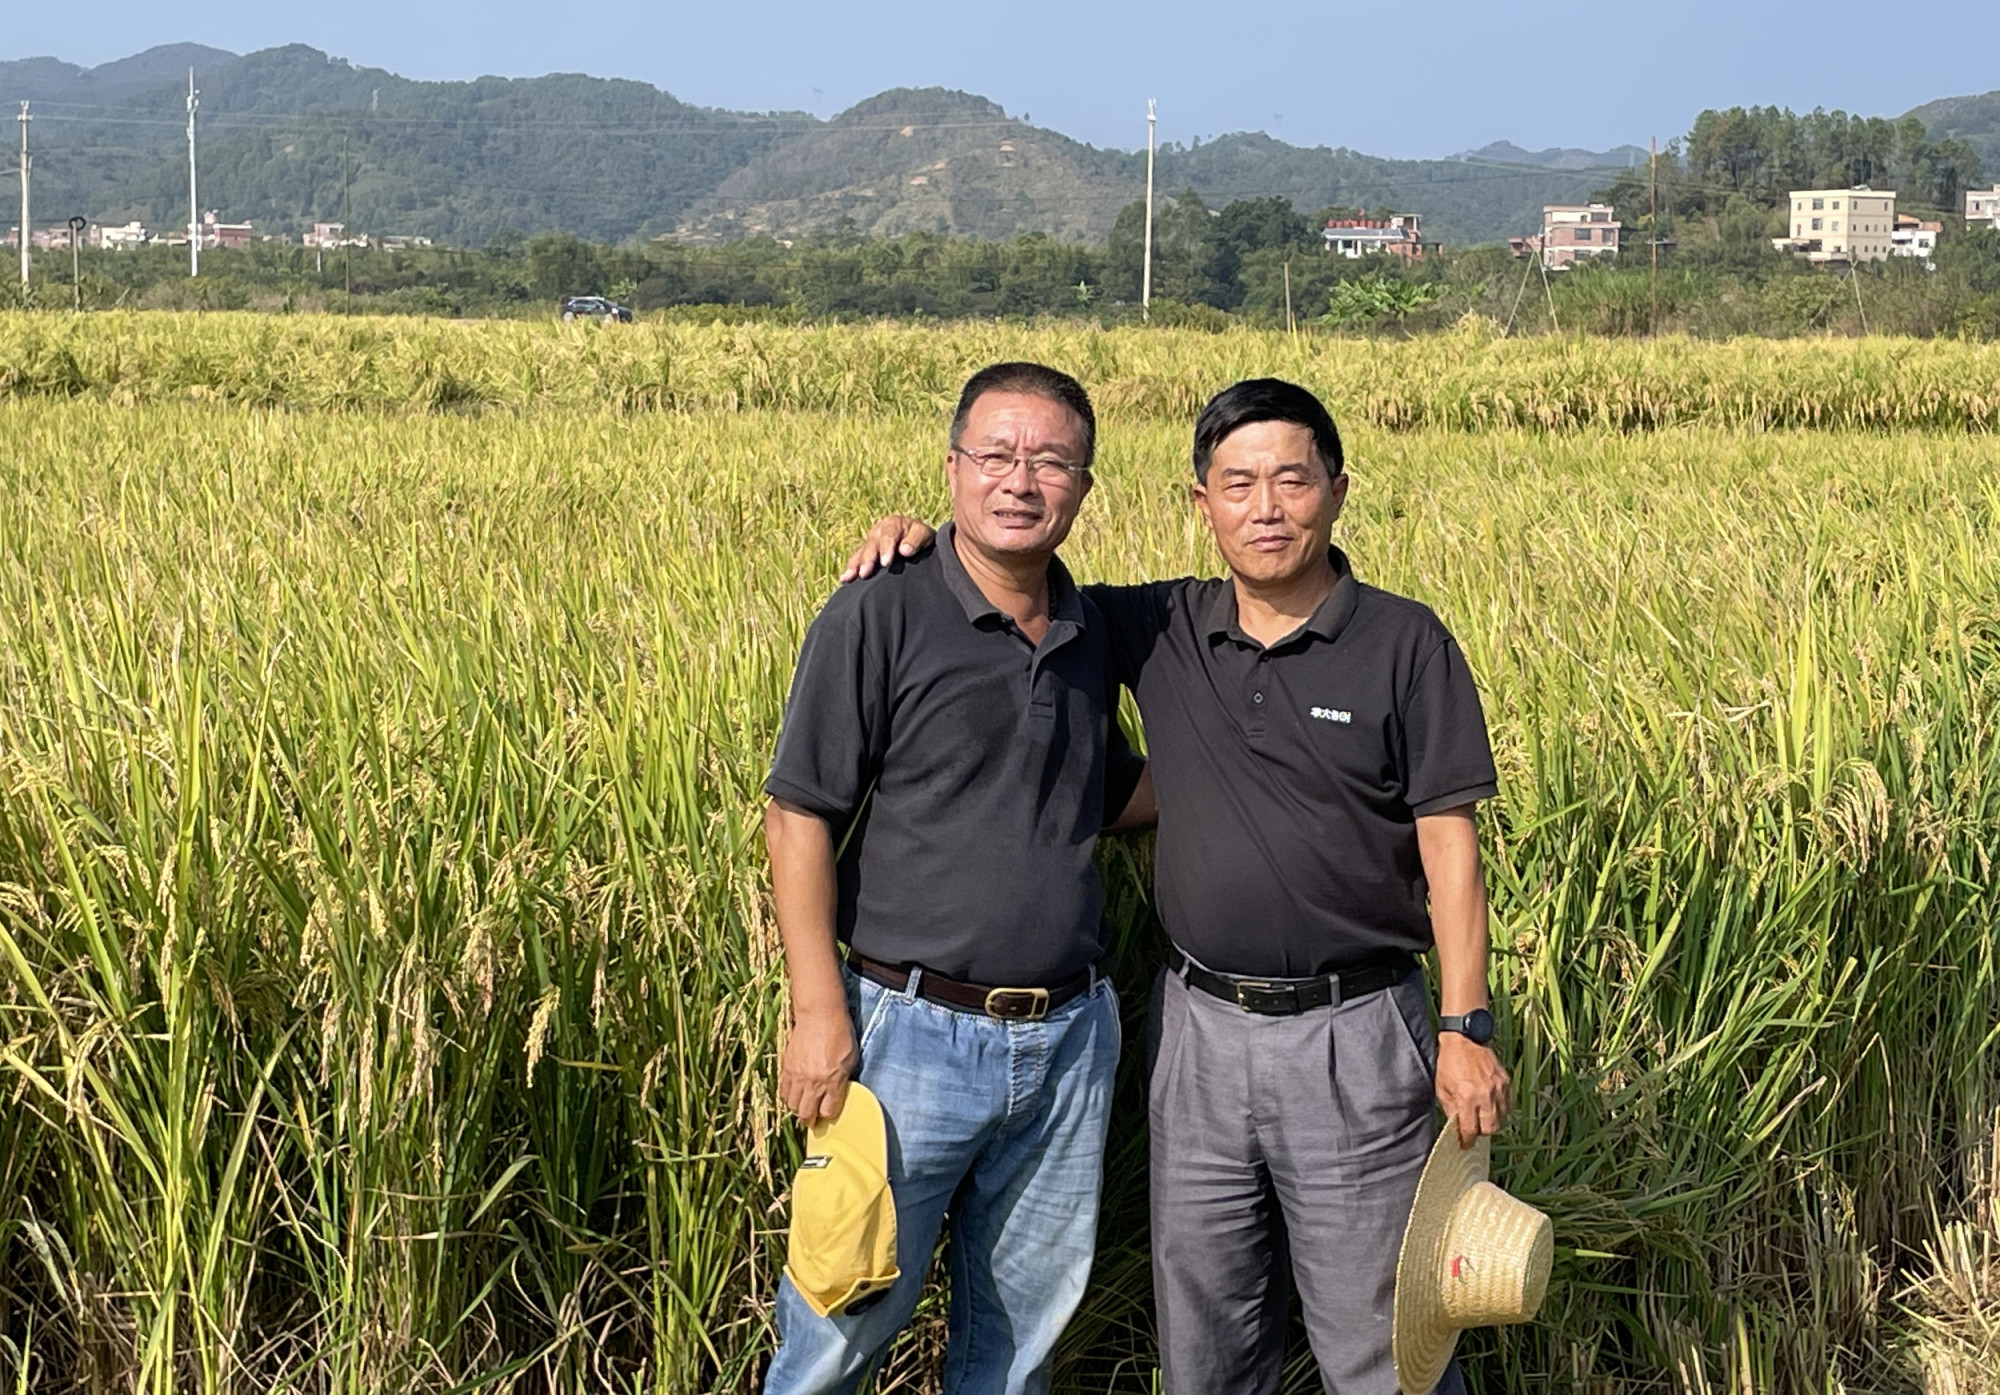 Liang Yuxin (left) planted more than 1 hectare of perennial rice in the southwestern province of Guangxi. Photo: Liang Yuxin